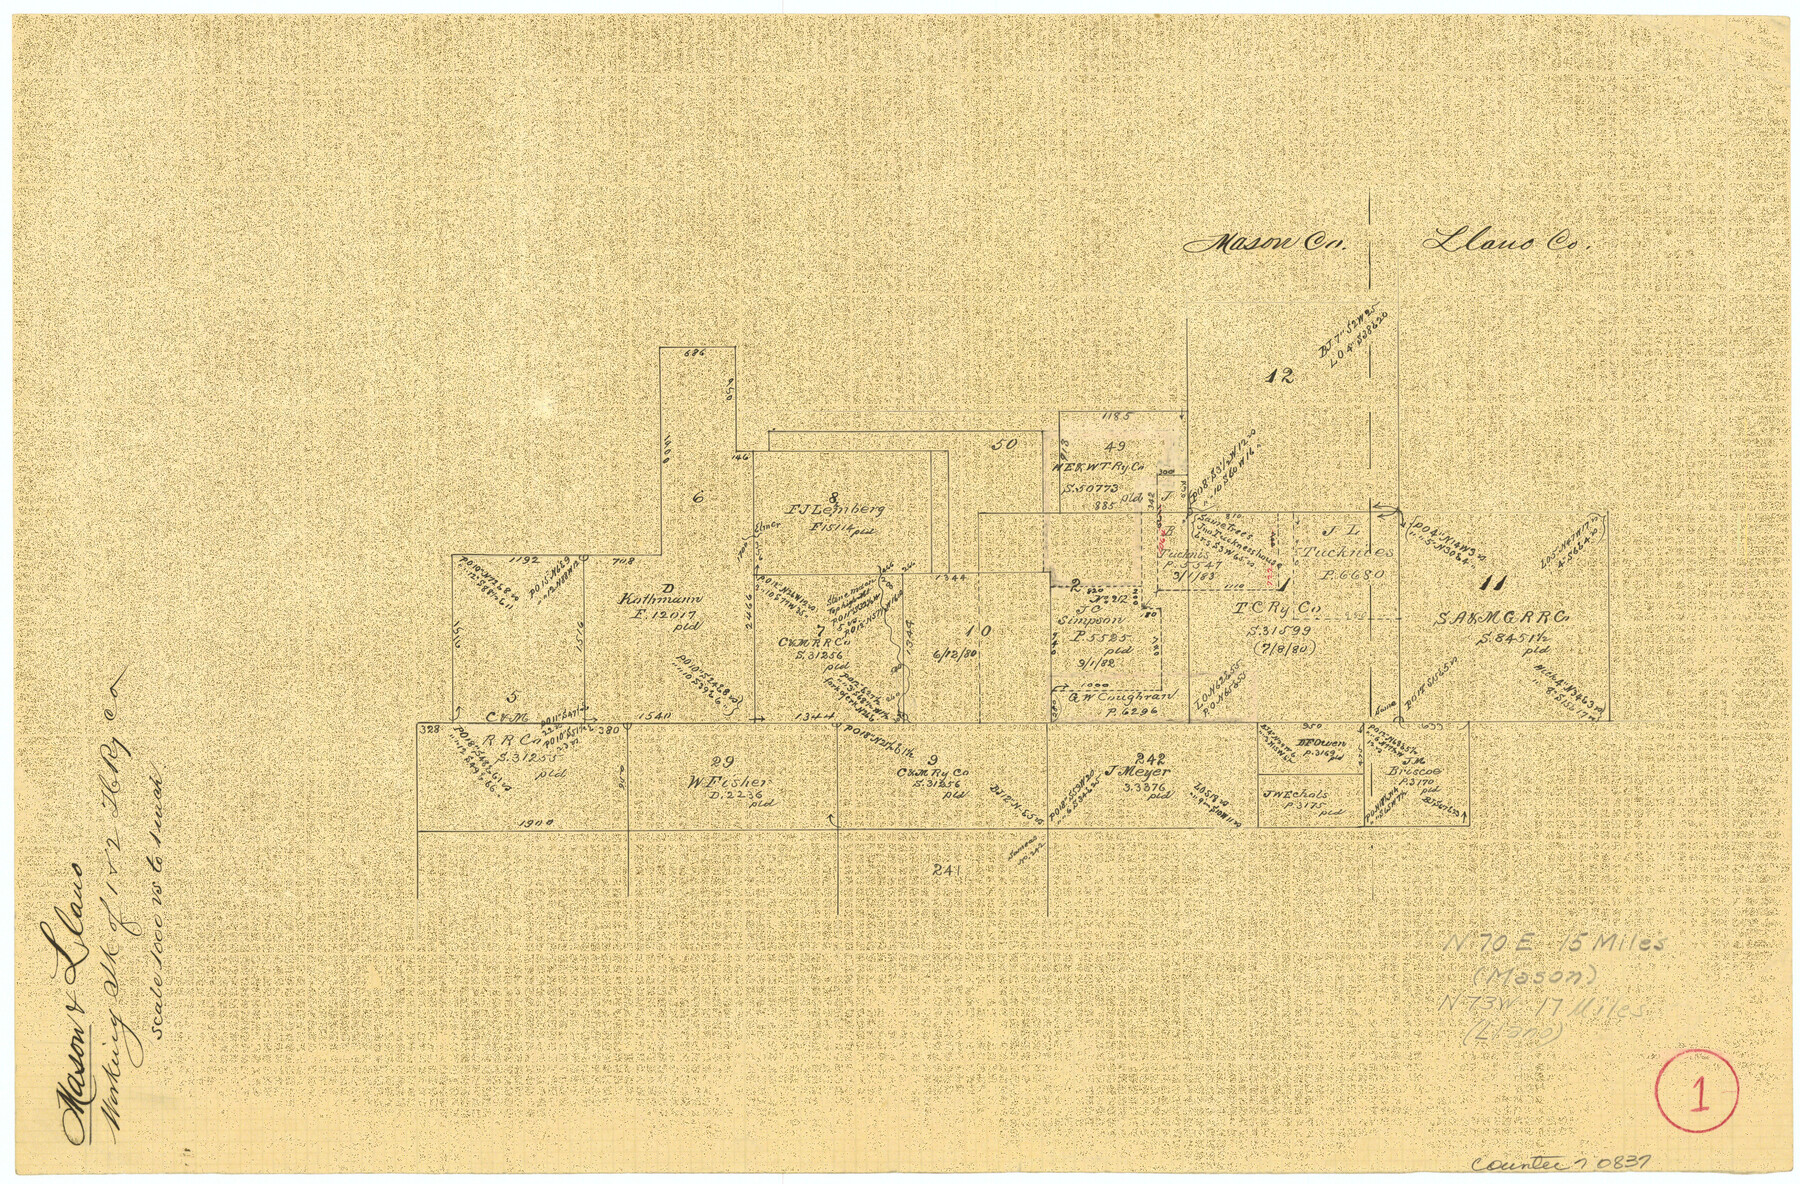 70837, Mason County Working Sketch 1, General Map Collection